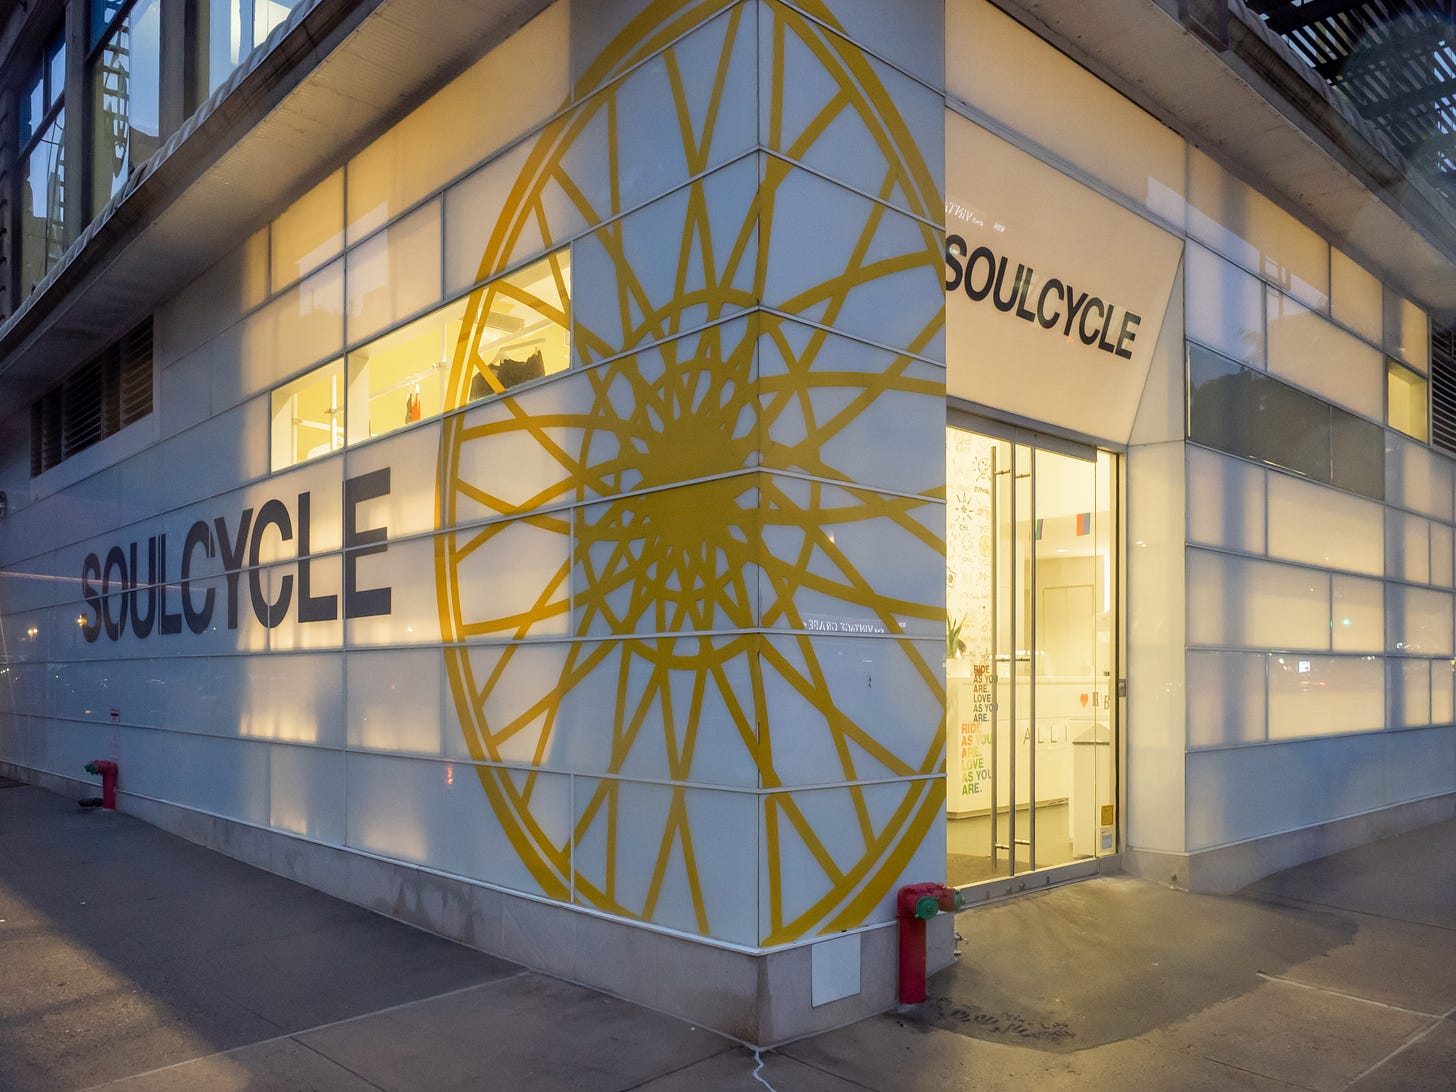 File:Soulcycle Storefront (48089757258).jpg - Wikimedia Commons